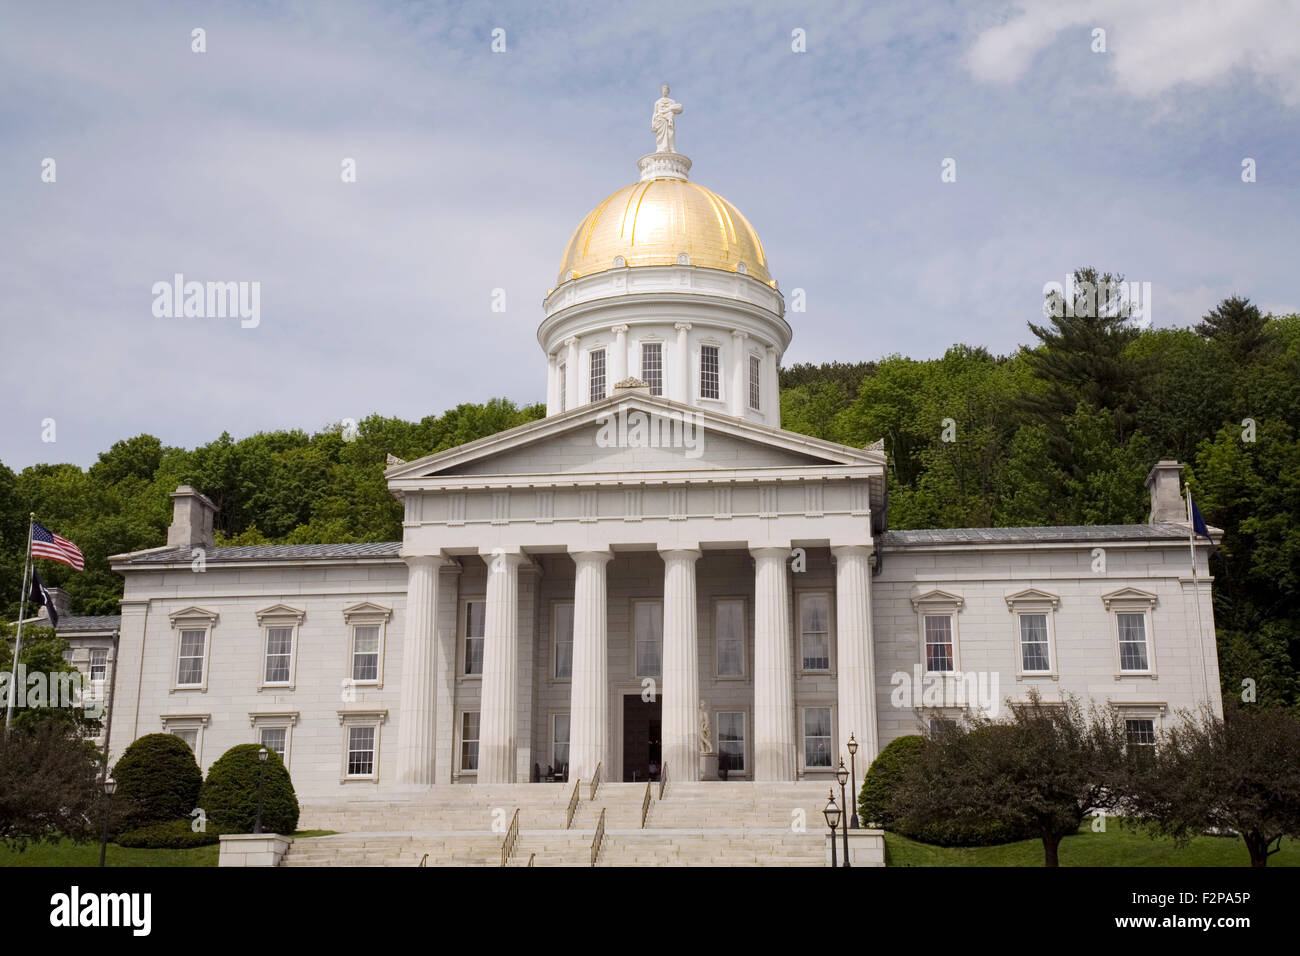 Since 1859 the Vermont State House has commanded the landscape of Montpelier, Vermont, the smallest capital city in America, USA Stock Photo